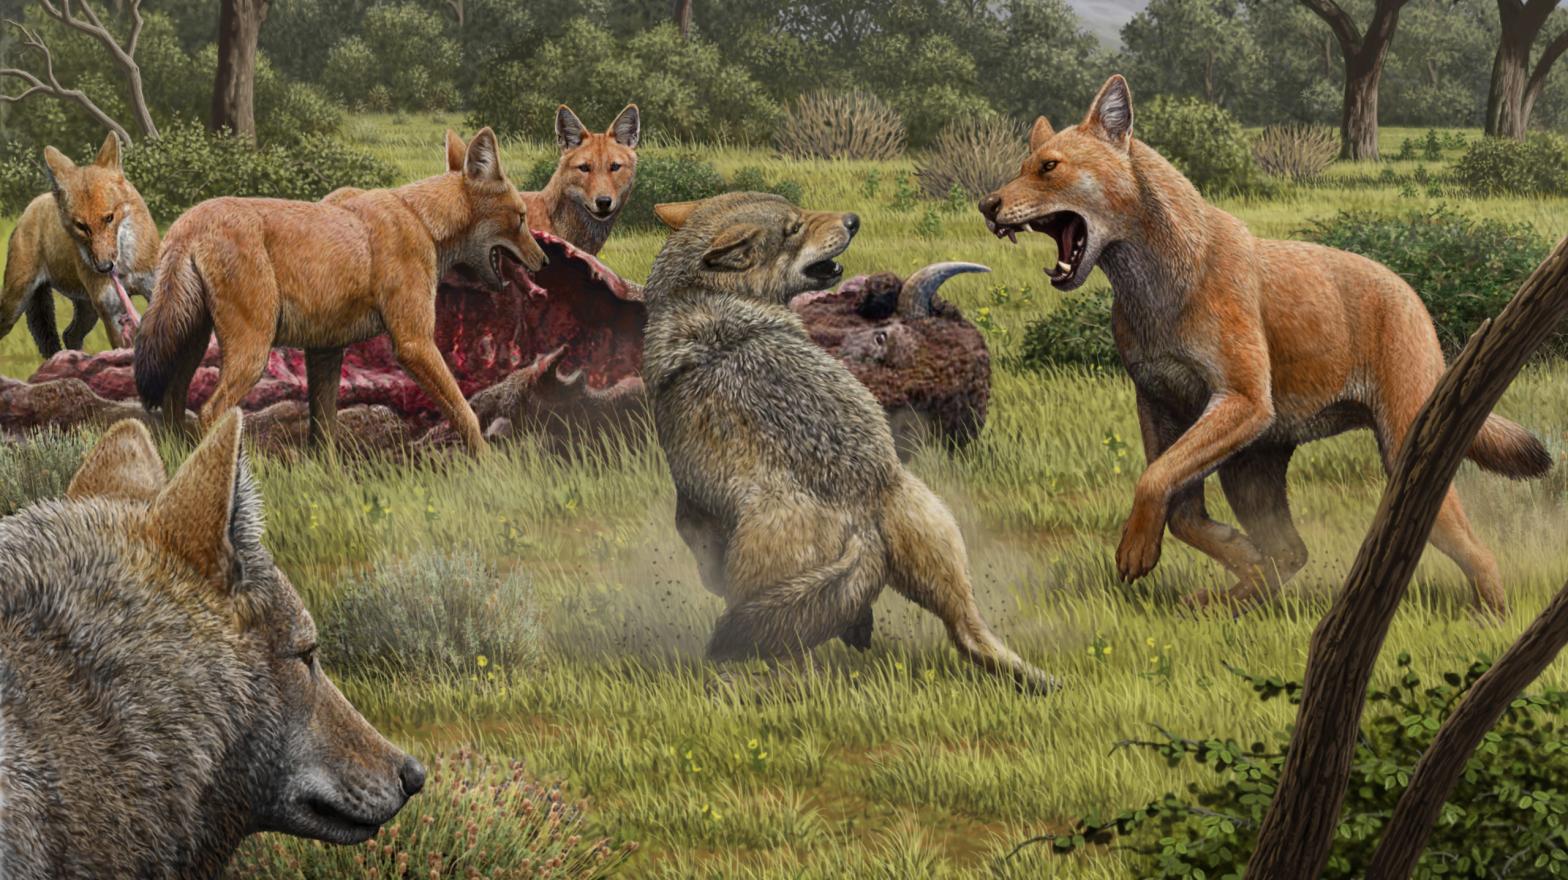 Artistic depiction of of dire wolves defending a bison kill from grey wolves. As the artwork shows, dire wolves featured reddish-brown colouring and large heads and jaws. (Image: Mauricio Antón)